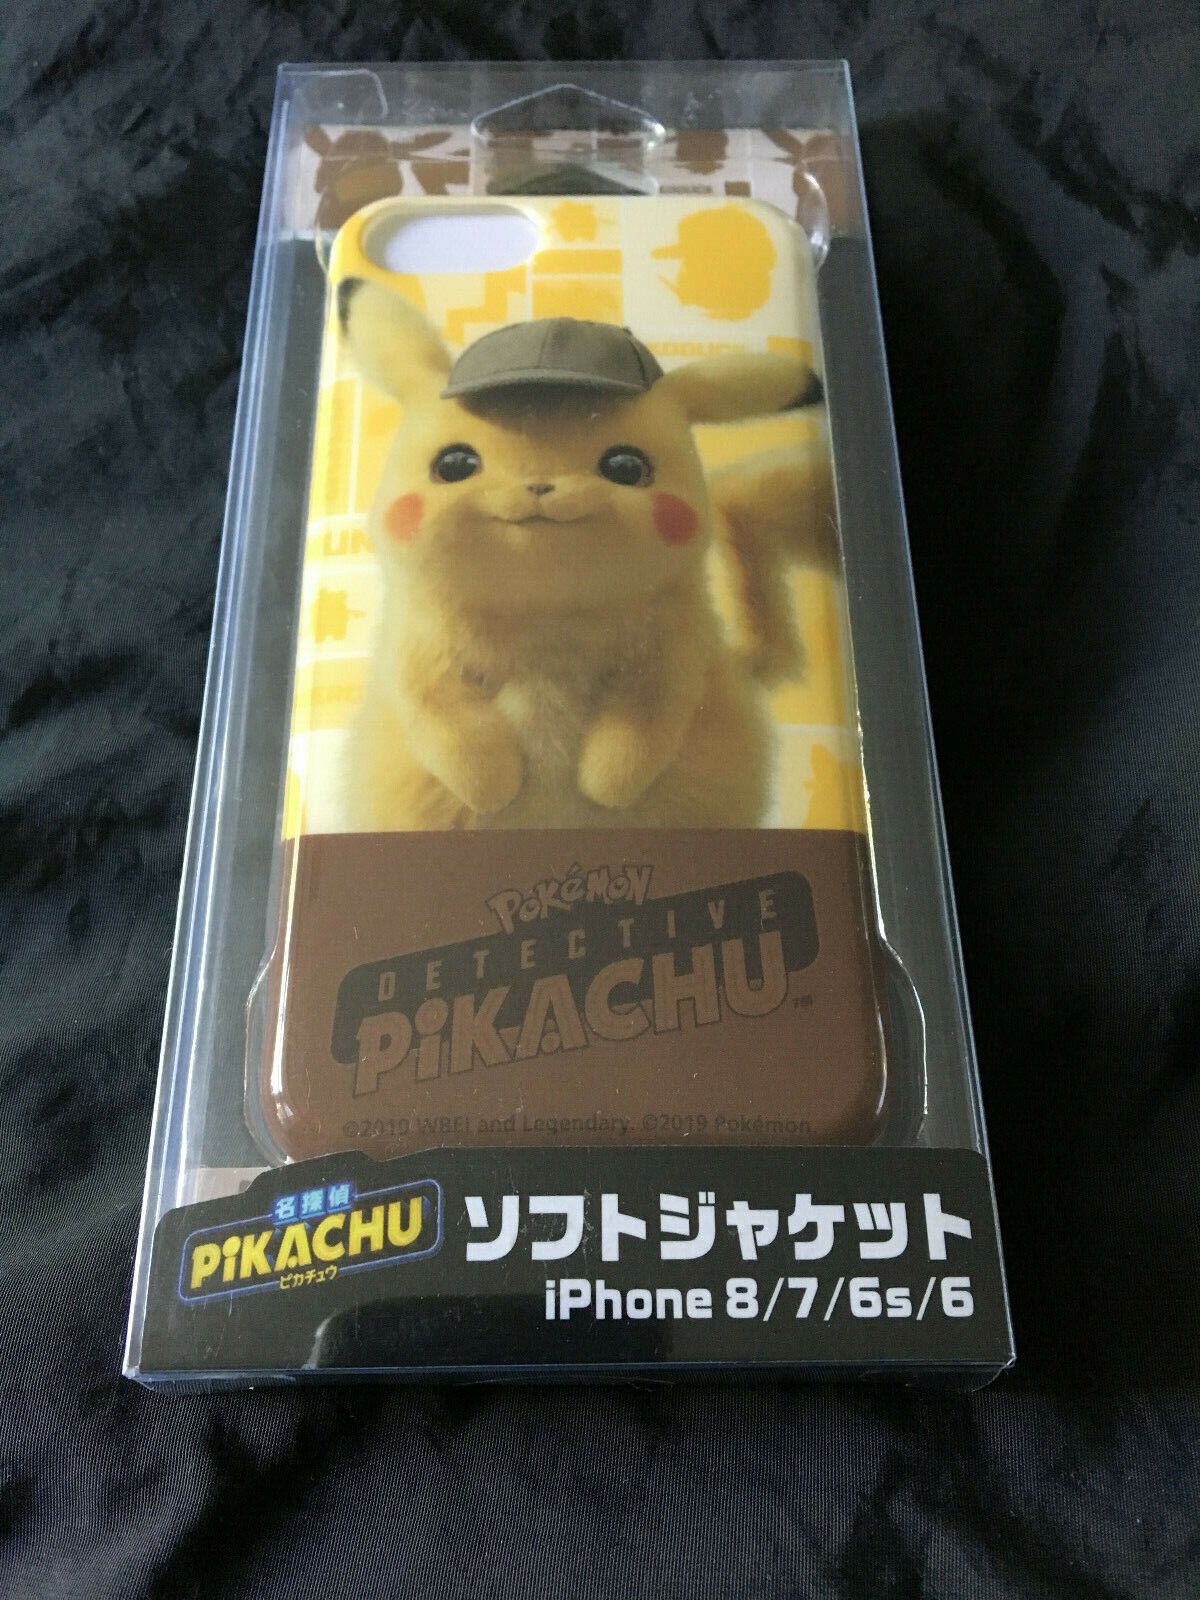 Pokemon Center Official Detective Pikachu iPhone Case Fits iPhone 8 7 6s 6